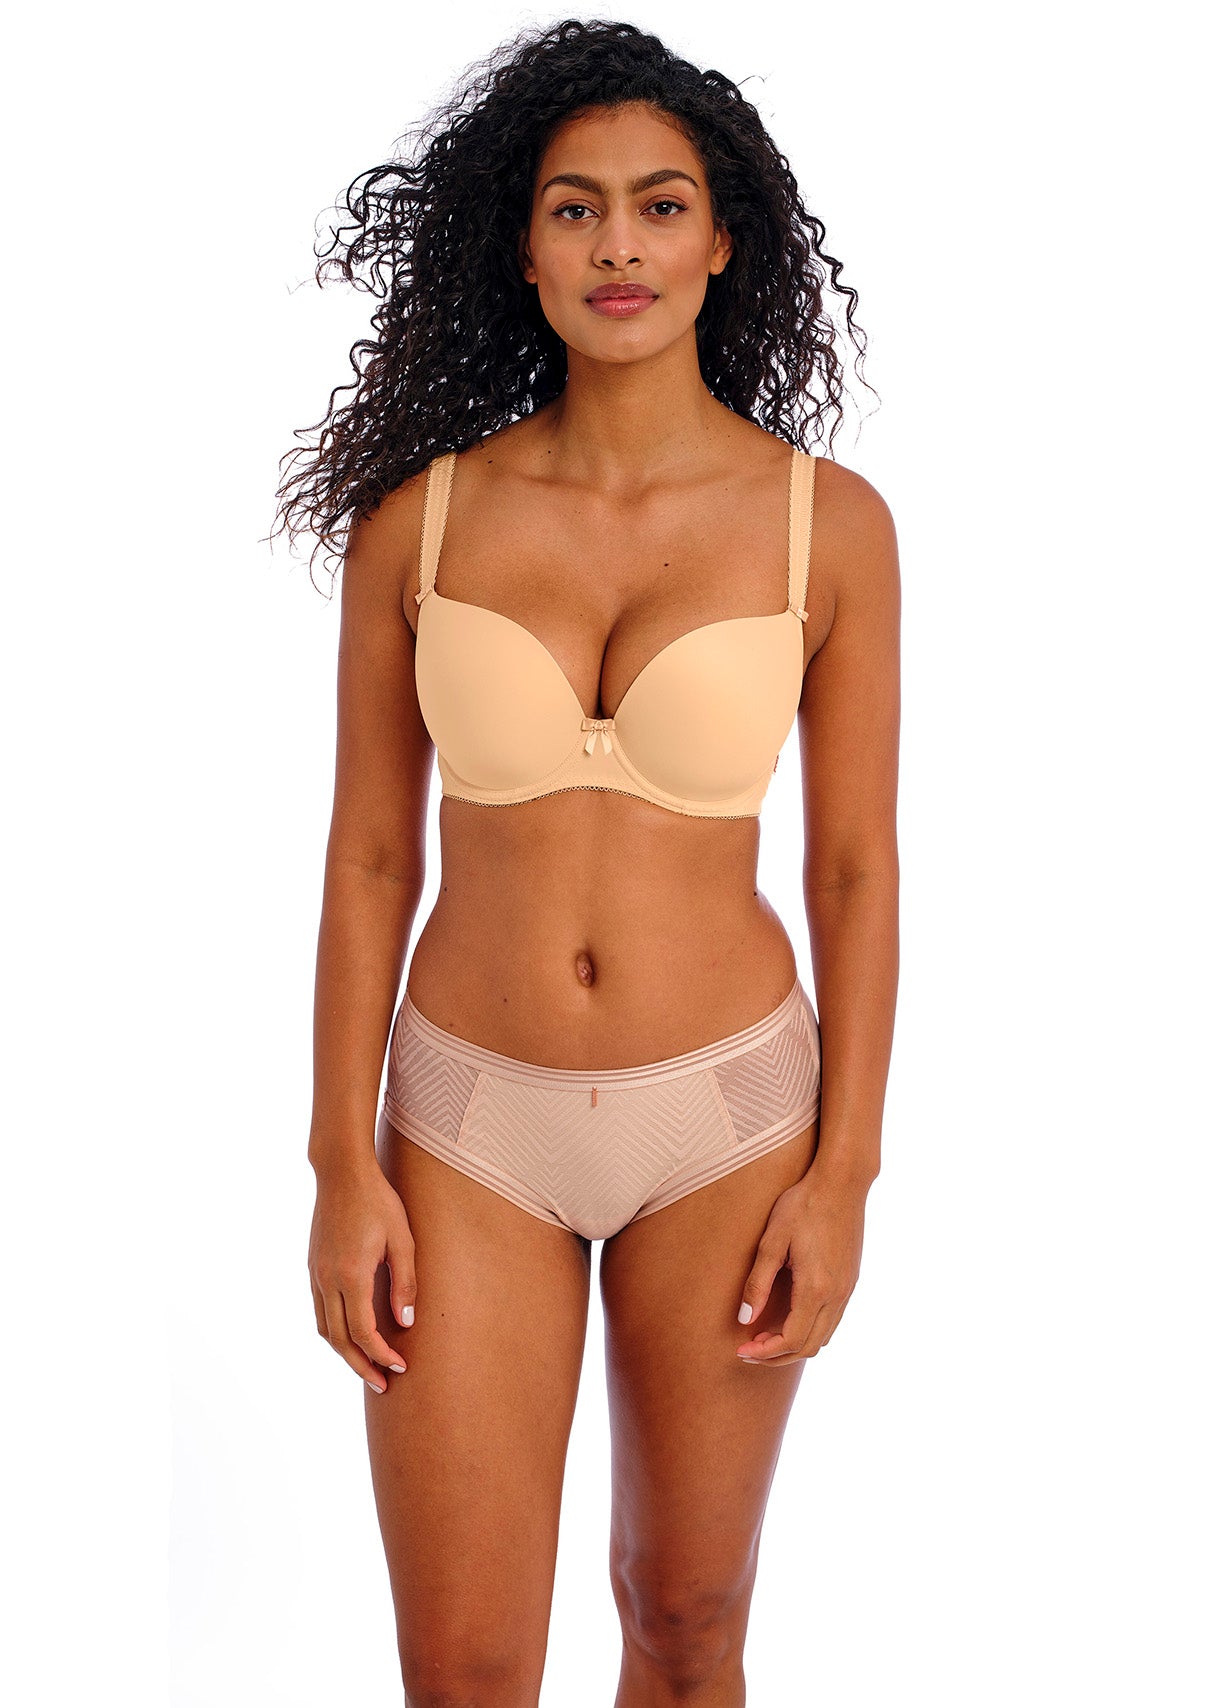 Freya Deco moulded plunge bra - Get fitted at She Science